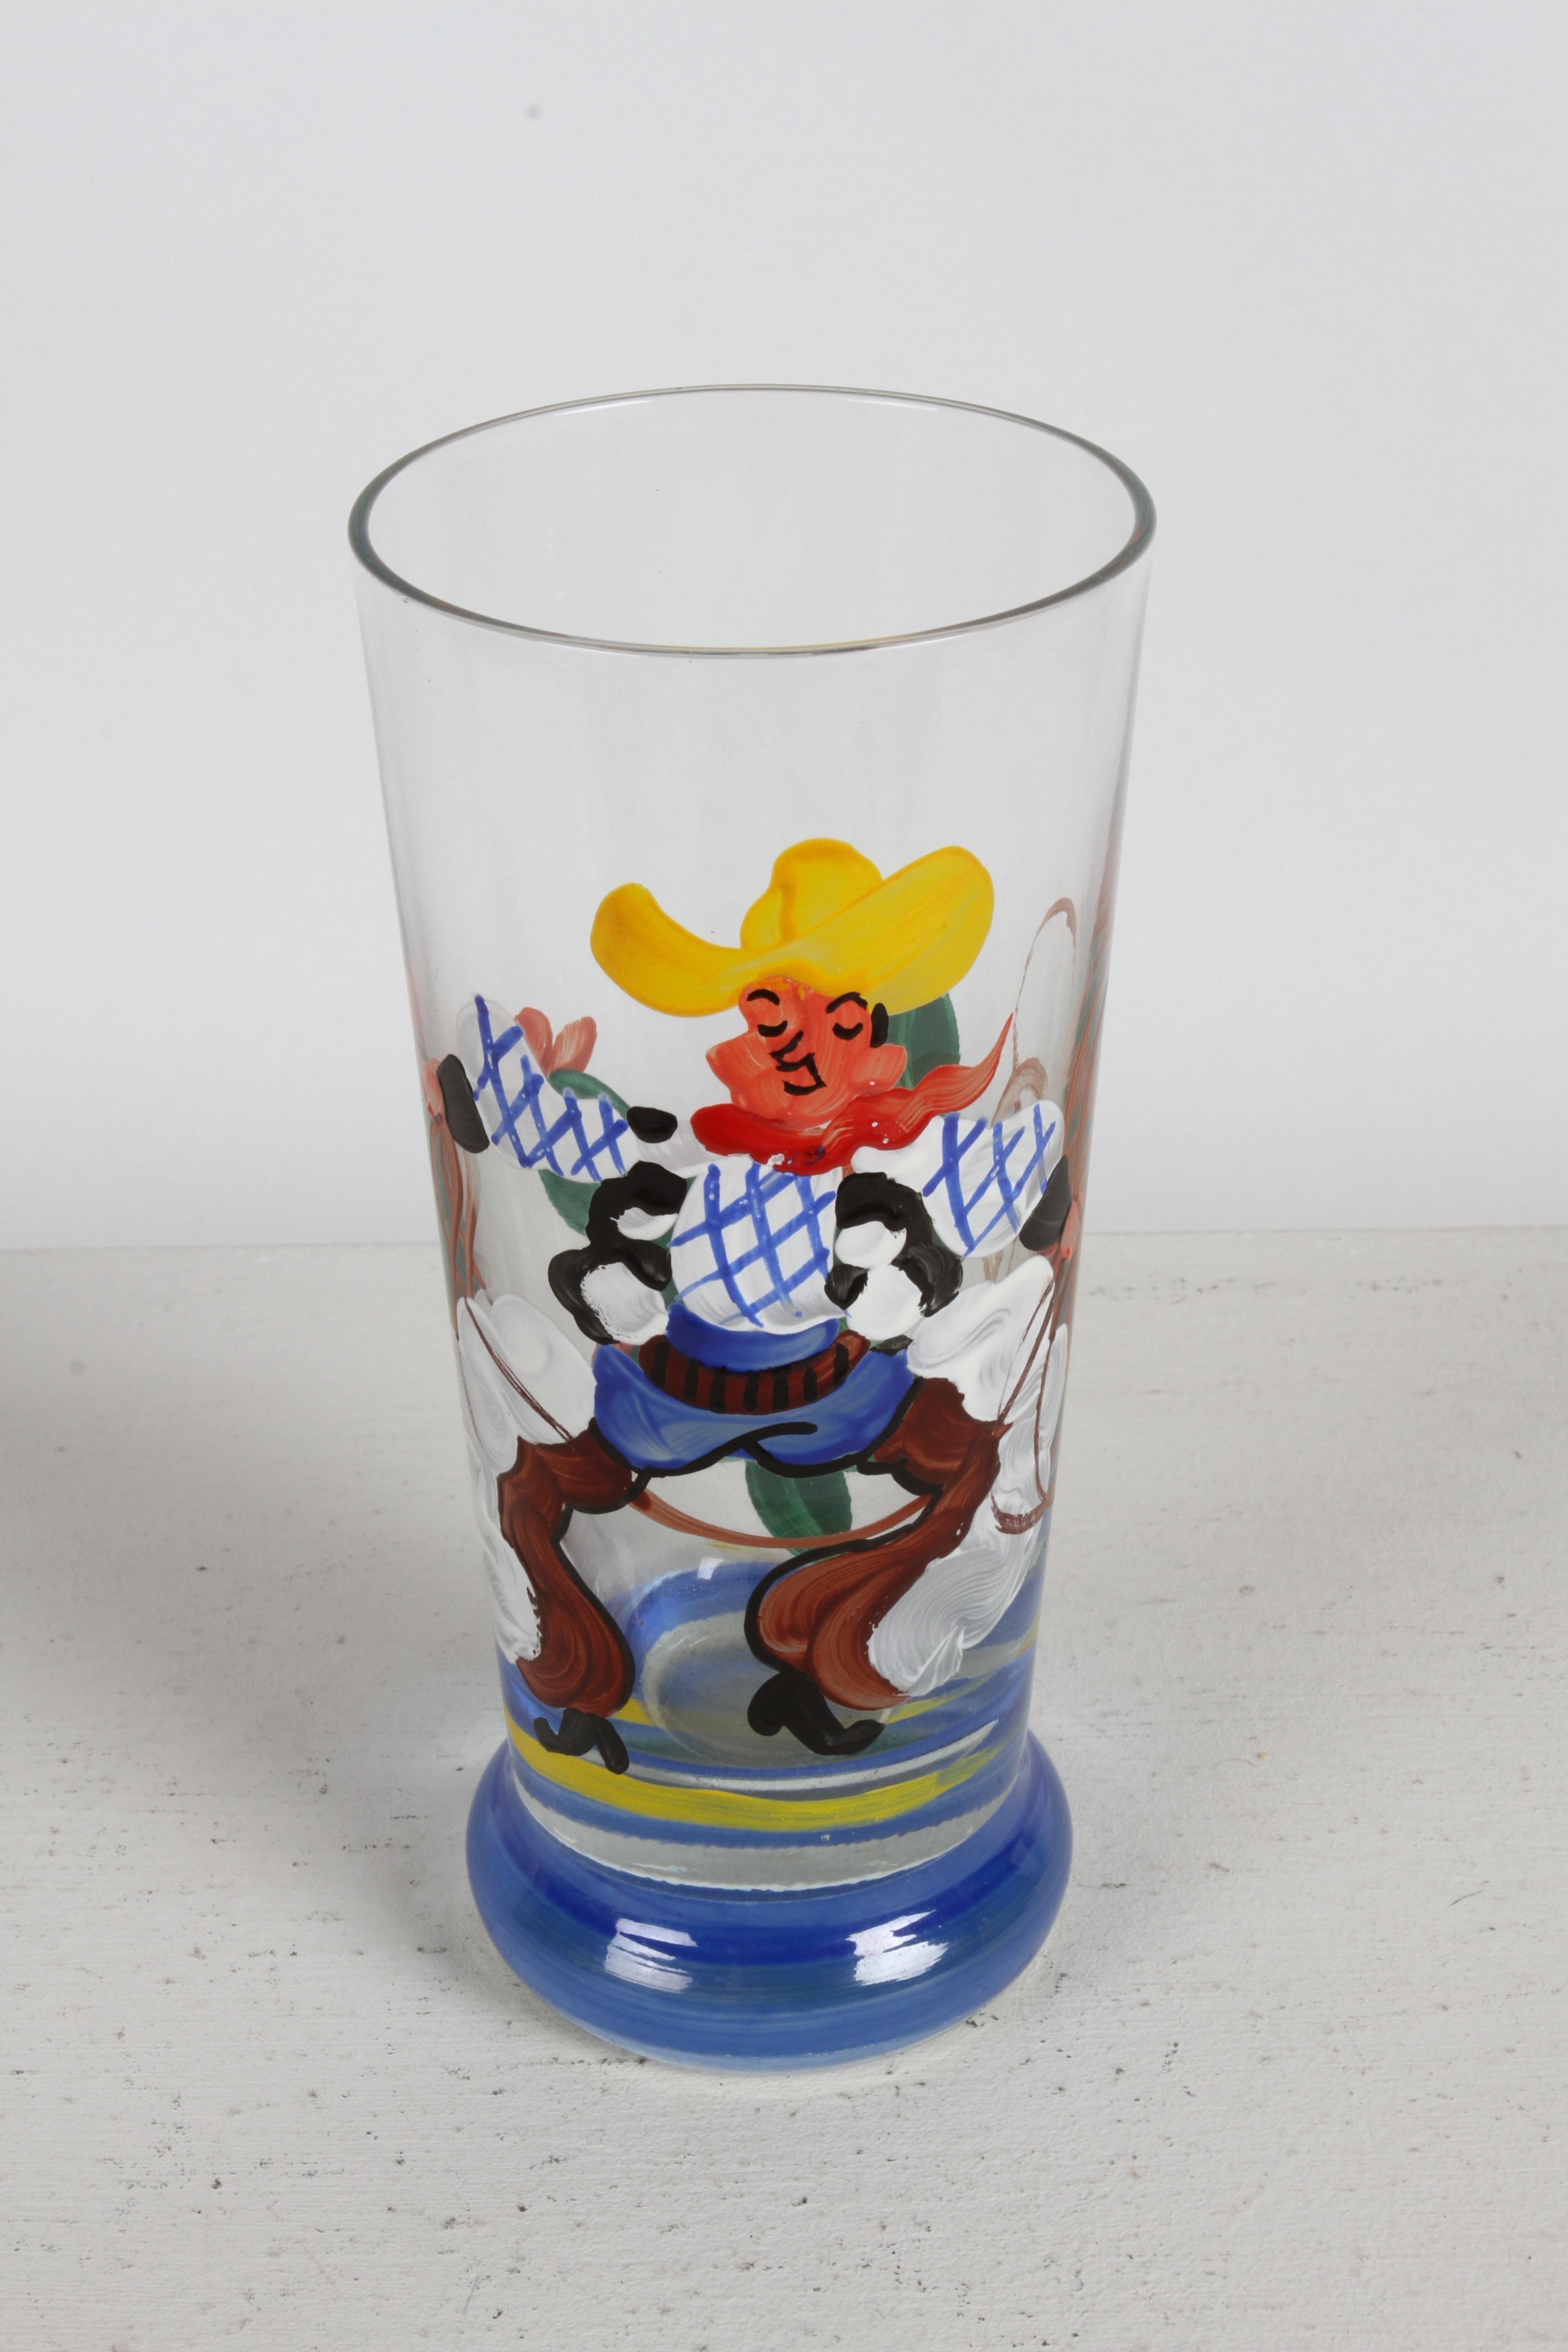 1940s Artist Hand-Painted Bar Glasses with Cowboy, Lasso & Cactus Theme - Rita  For Sale 6